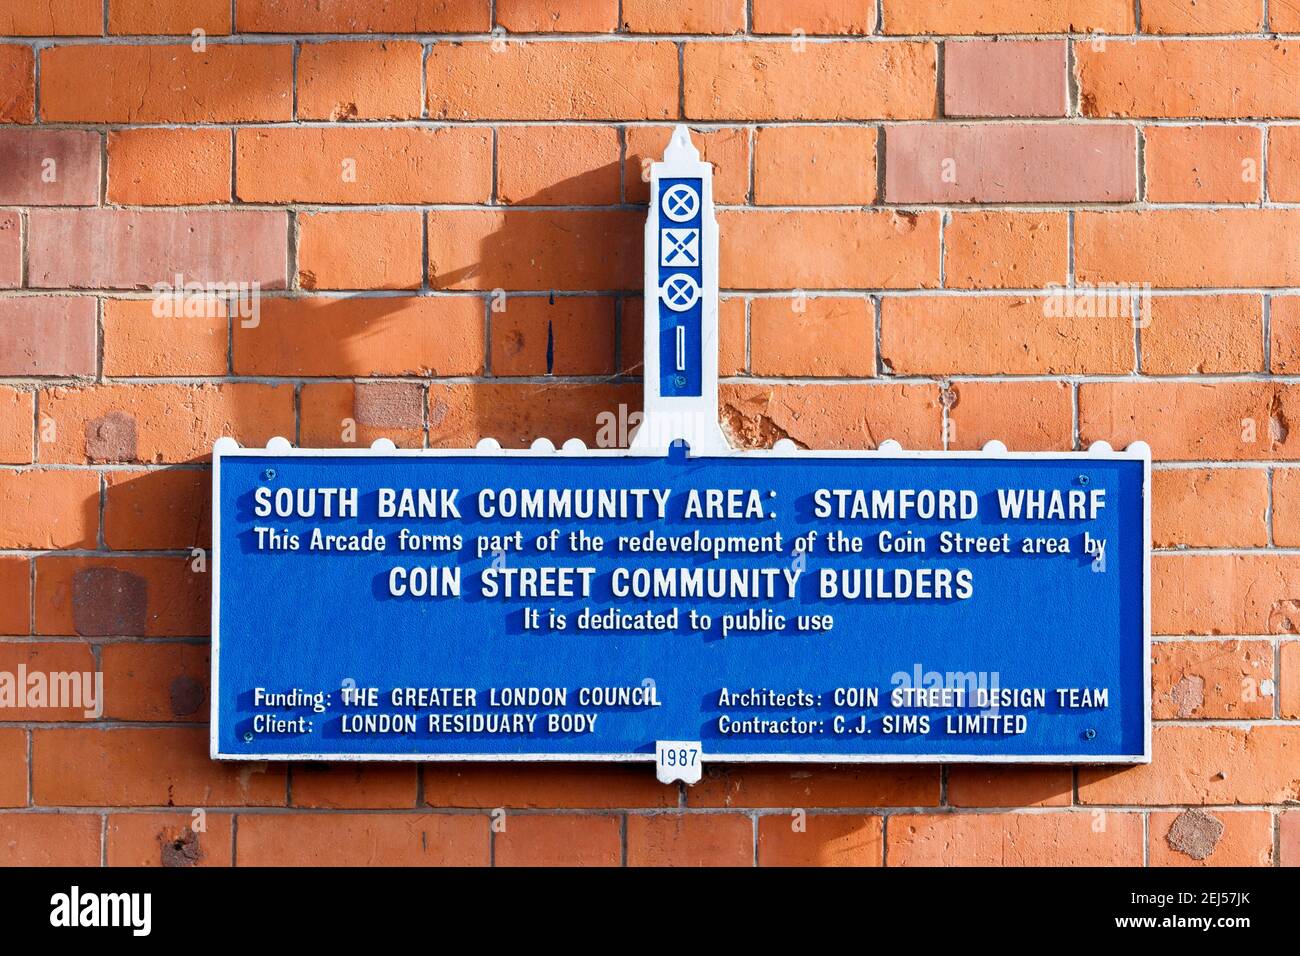 Close-up of a plaque commemorating the redevelopment of Stamford Wharf and South Bank Community Area, London, UK Stock Photo